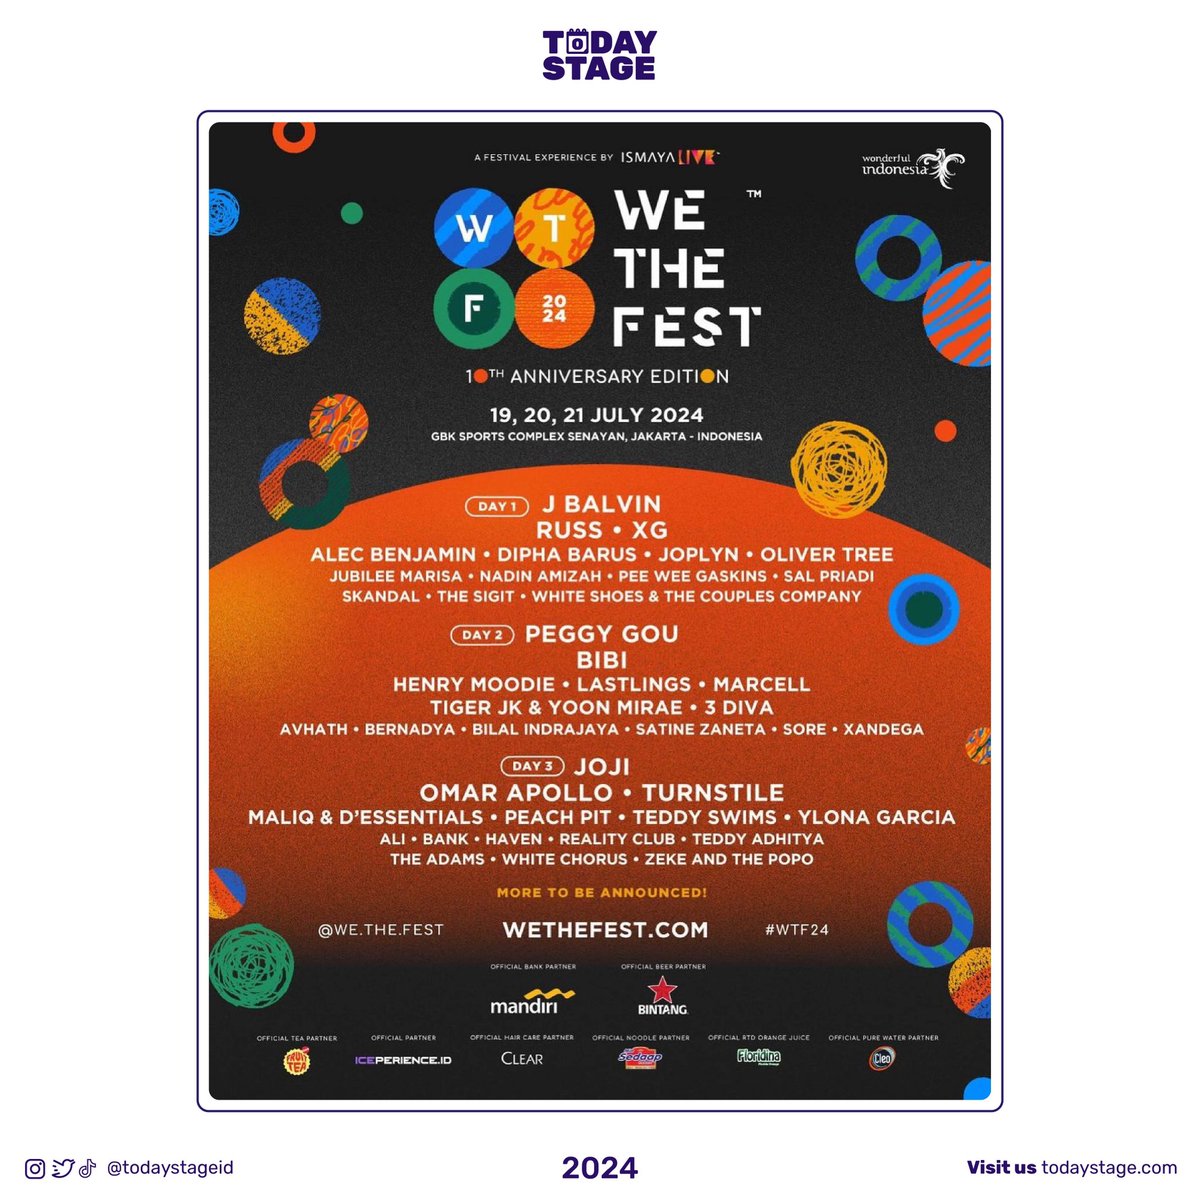 #WTF24 daily splits are here, with MORE EXCITING NAMES TO BE ANNOUNCED SOON!

As summer approaches in full swing, let’s come together to dance, laugh, and celebrate the good days at WTF24

Secure your pass via wethefest.com